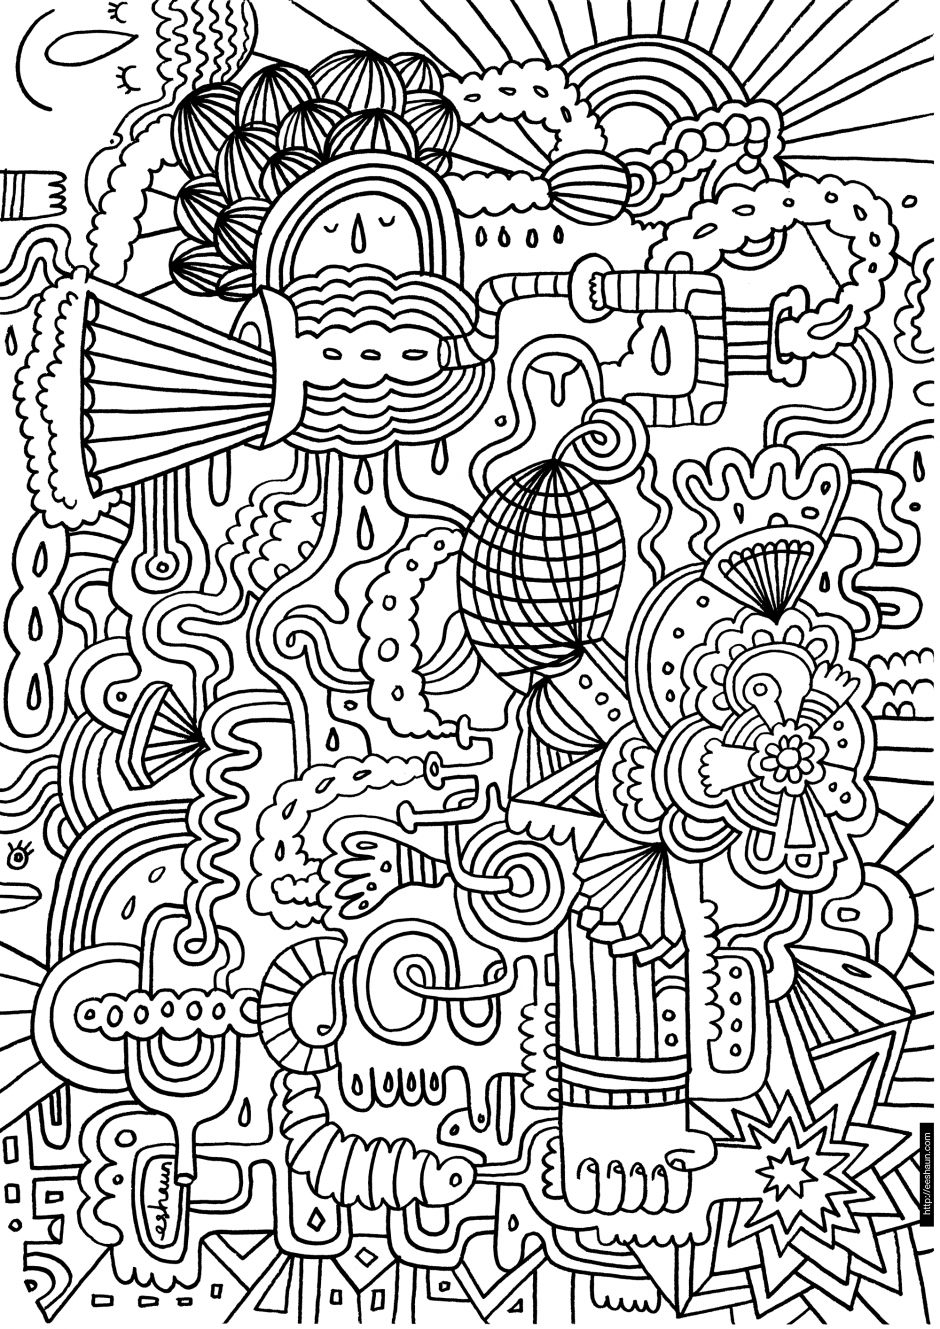 challenging coloring pages with words inside